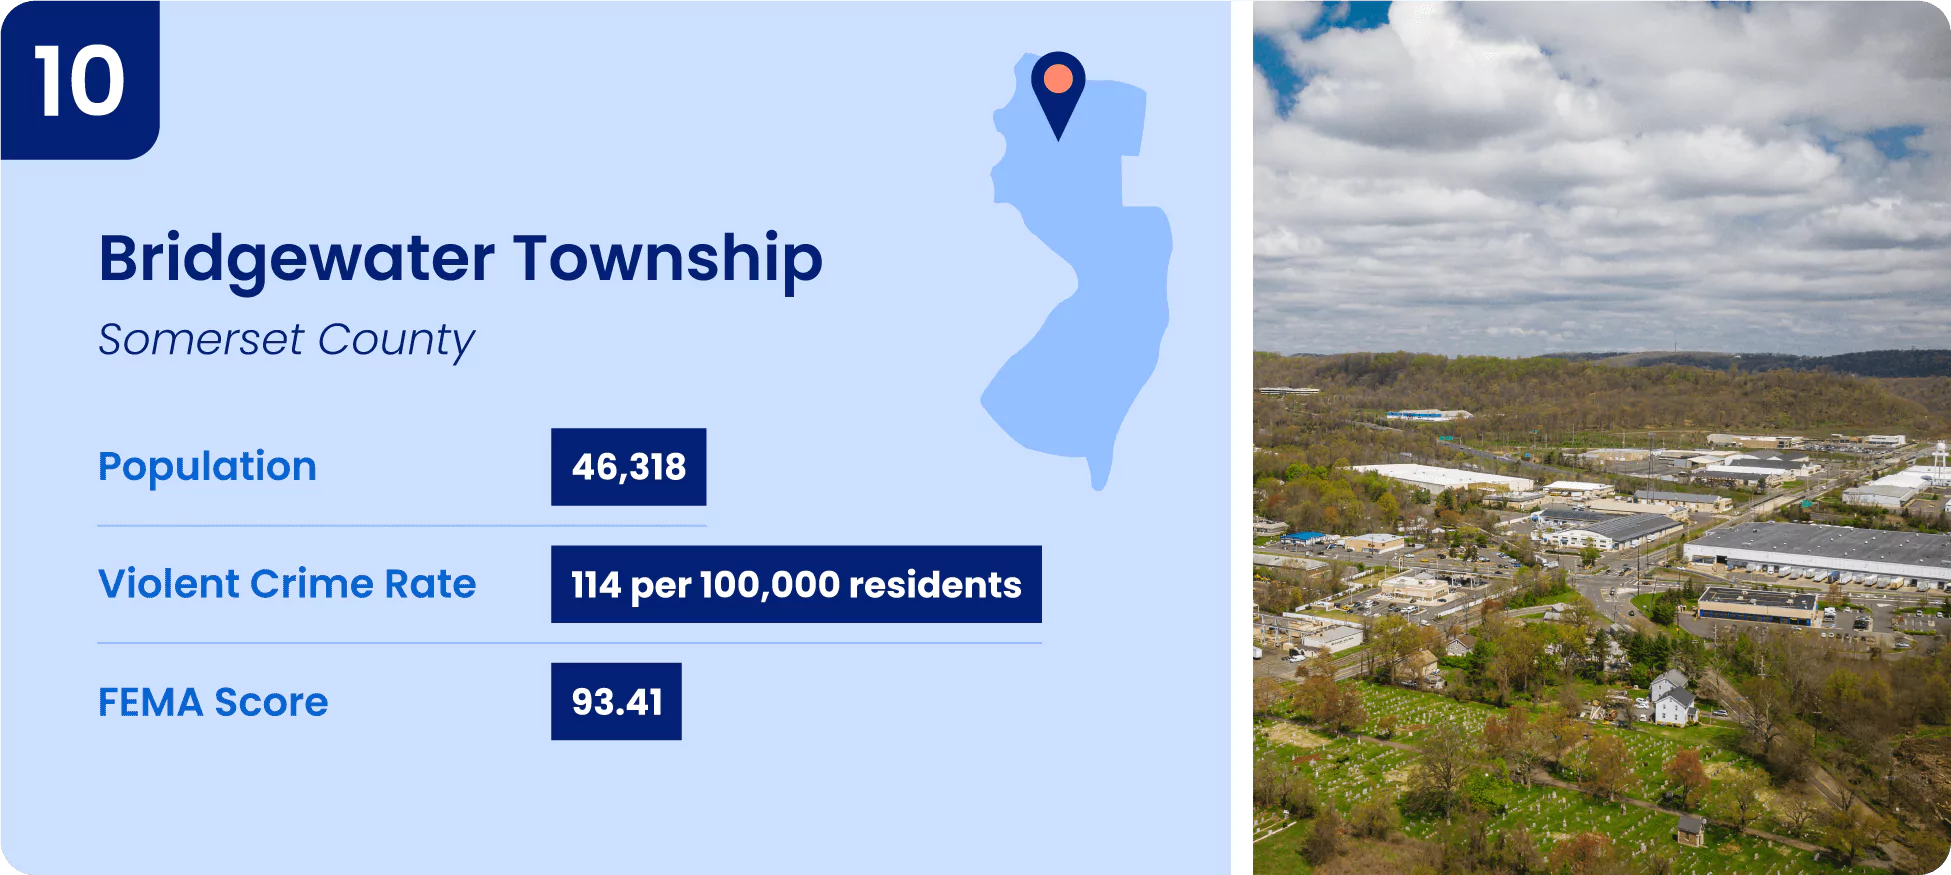 Image shows key information for one of the safest cities in New Jersey, Bridgewater Township.